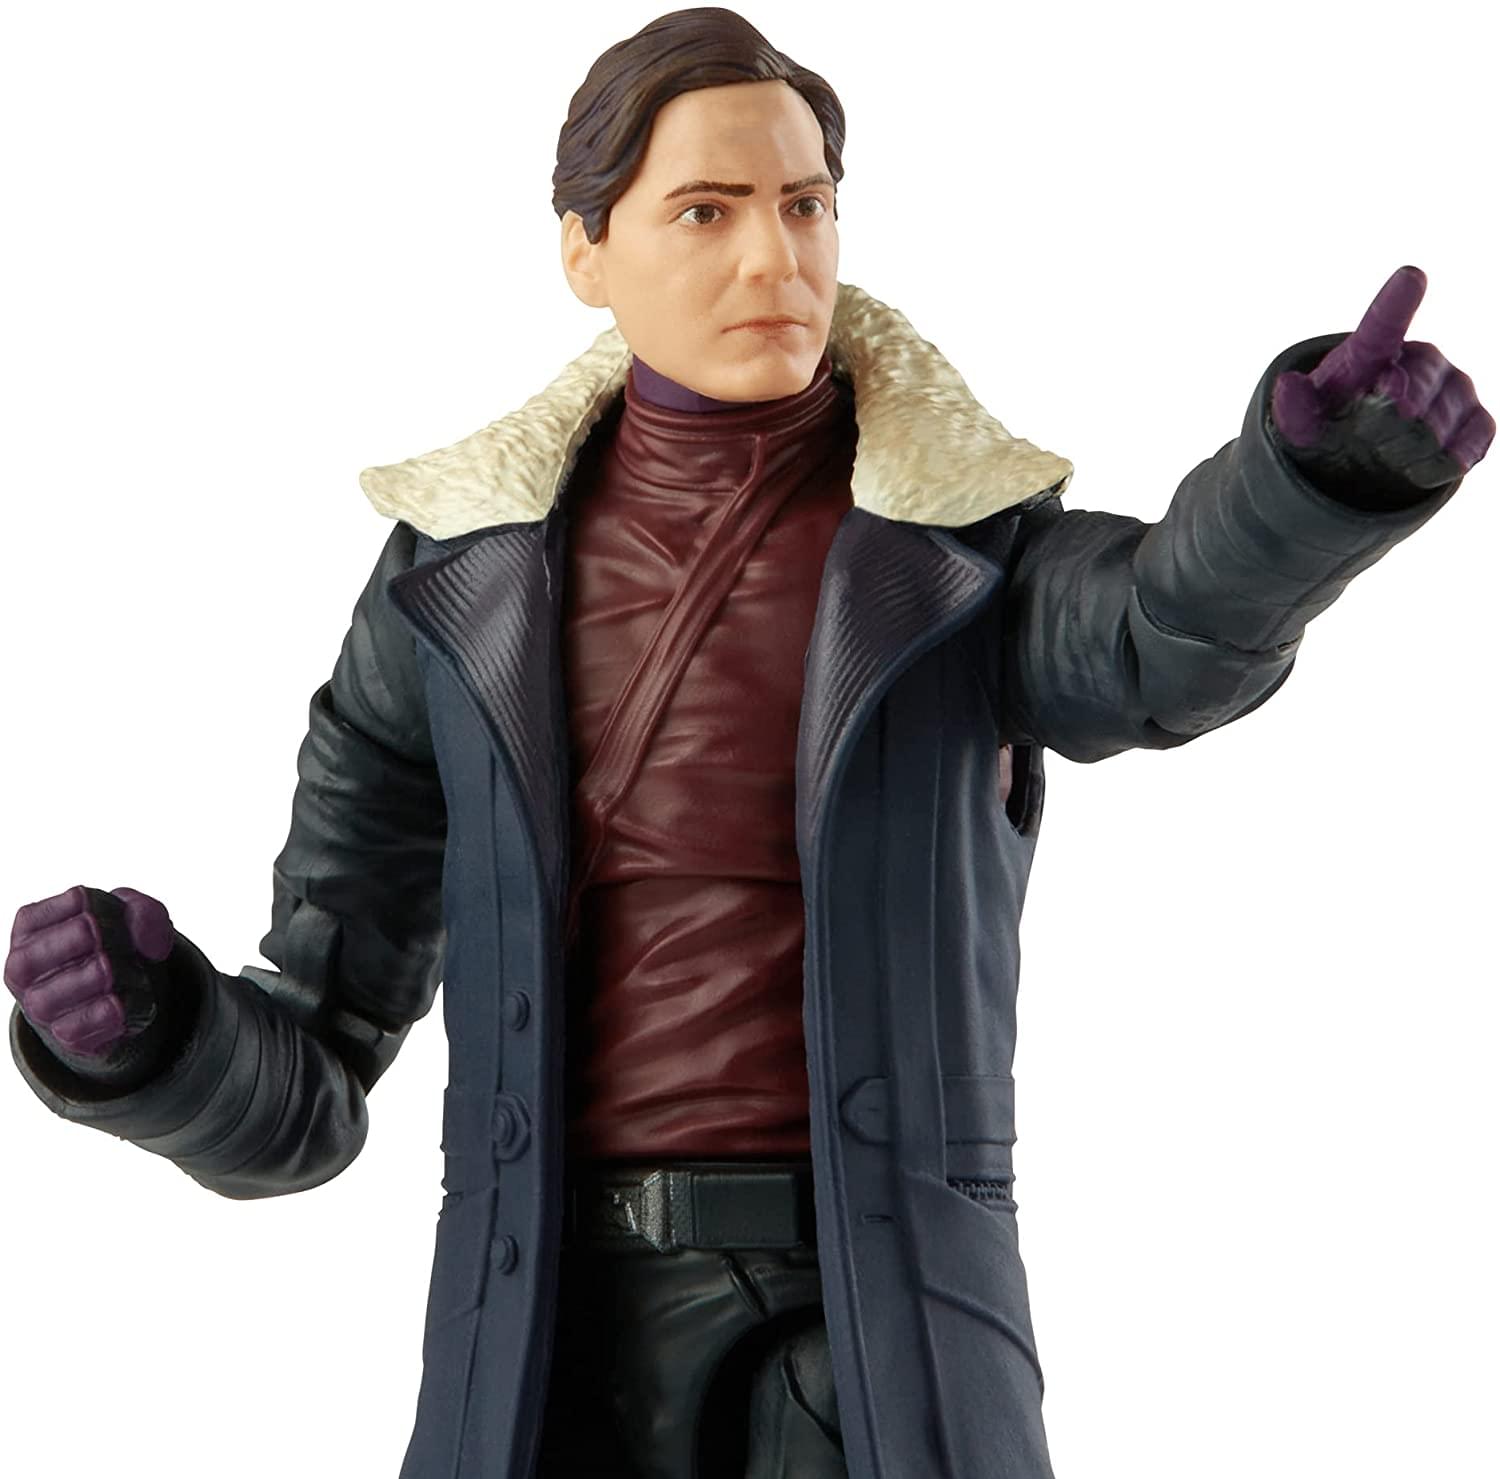 Marvel Legends 6 Inch Action Figure | Falcon and Winter Soldier Baron Zemo